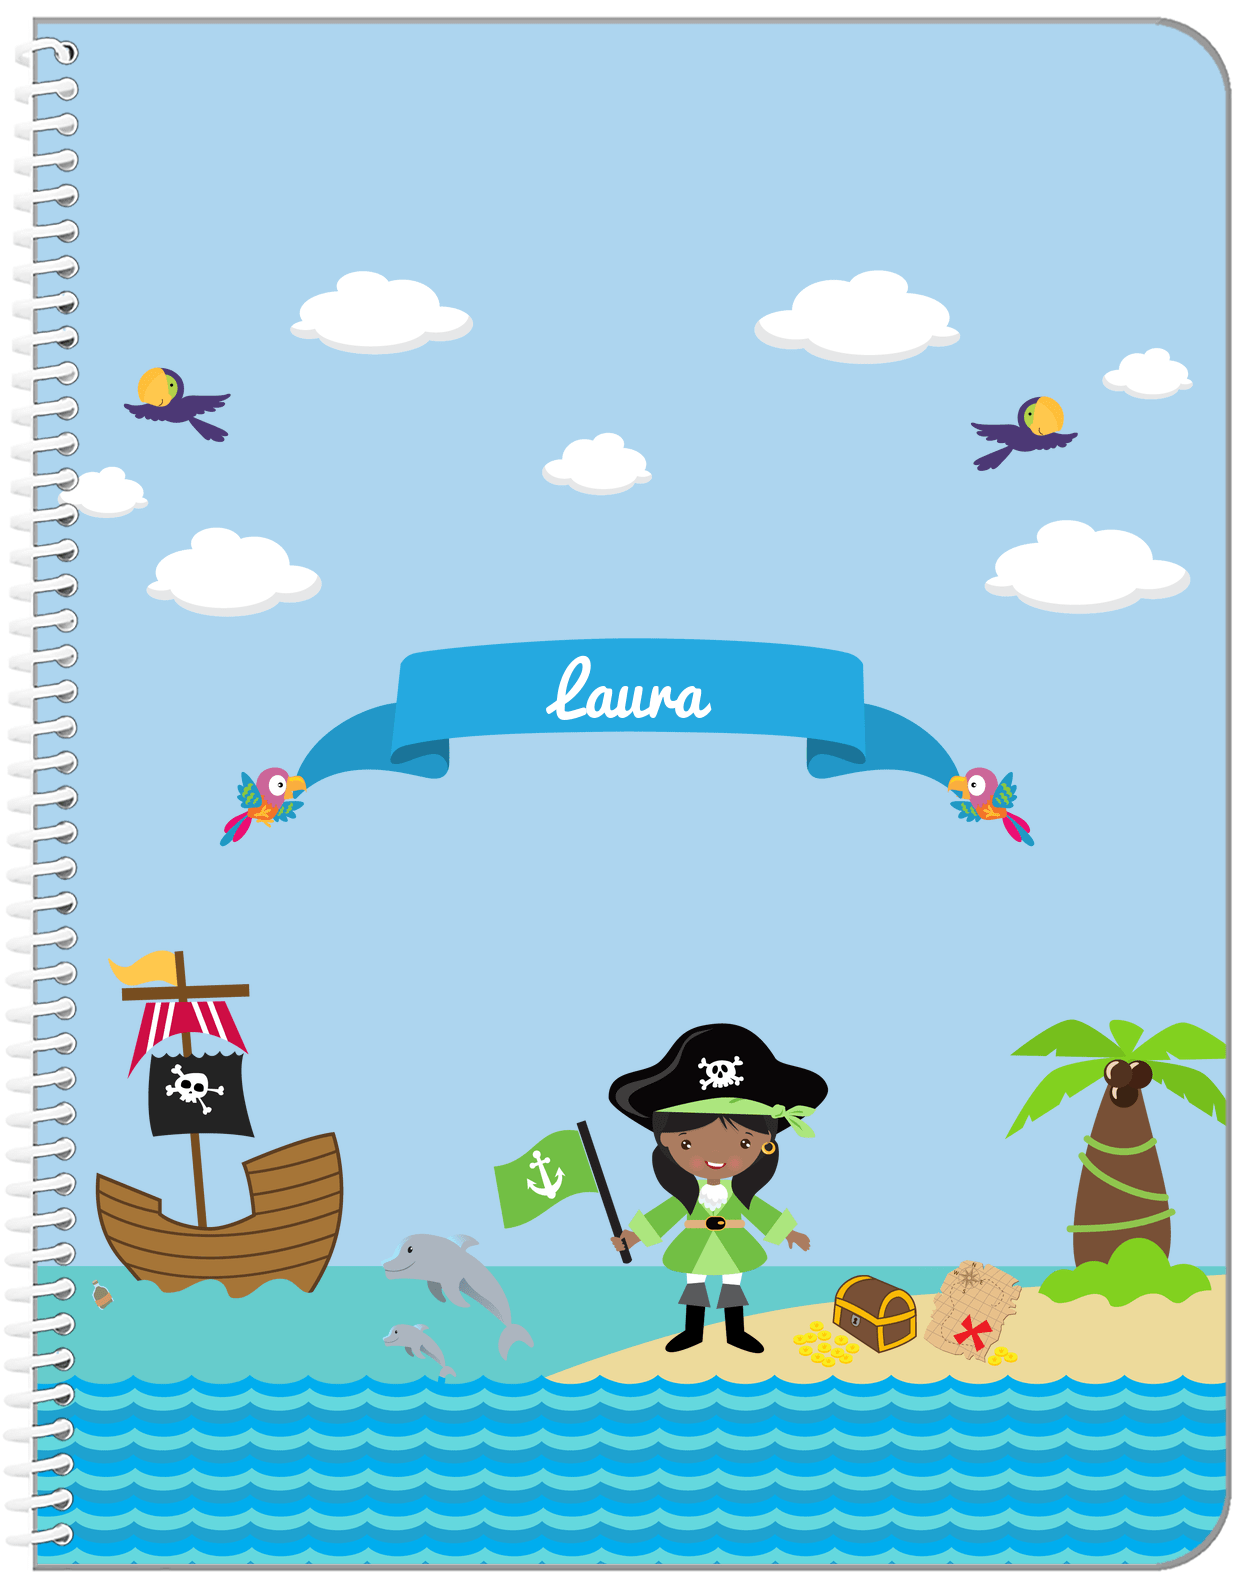 Personalized Pirate Notebook I - Girl Pirate with Flag - Black Girl - Front View